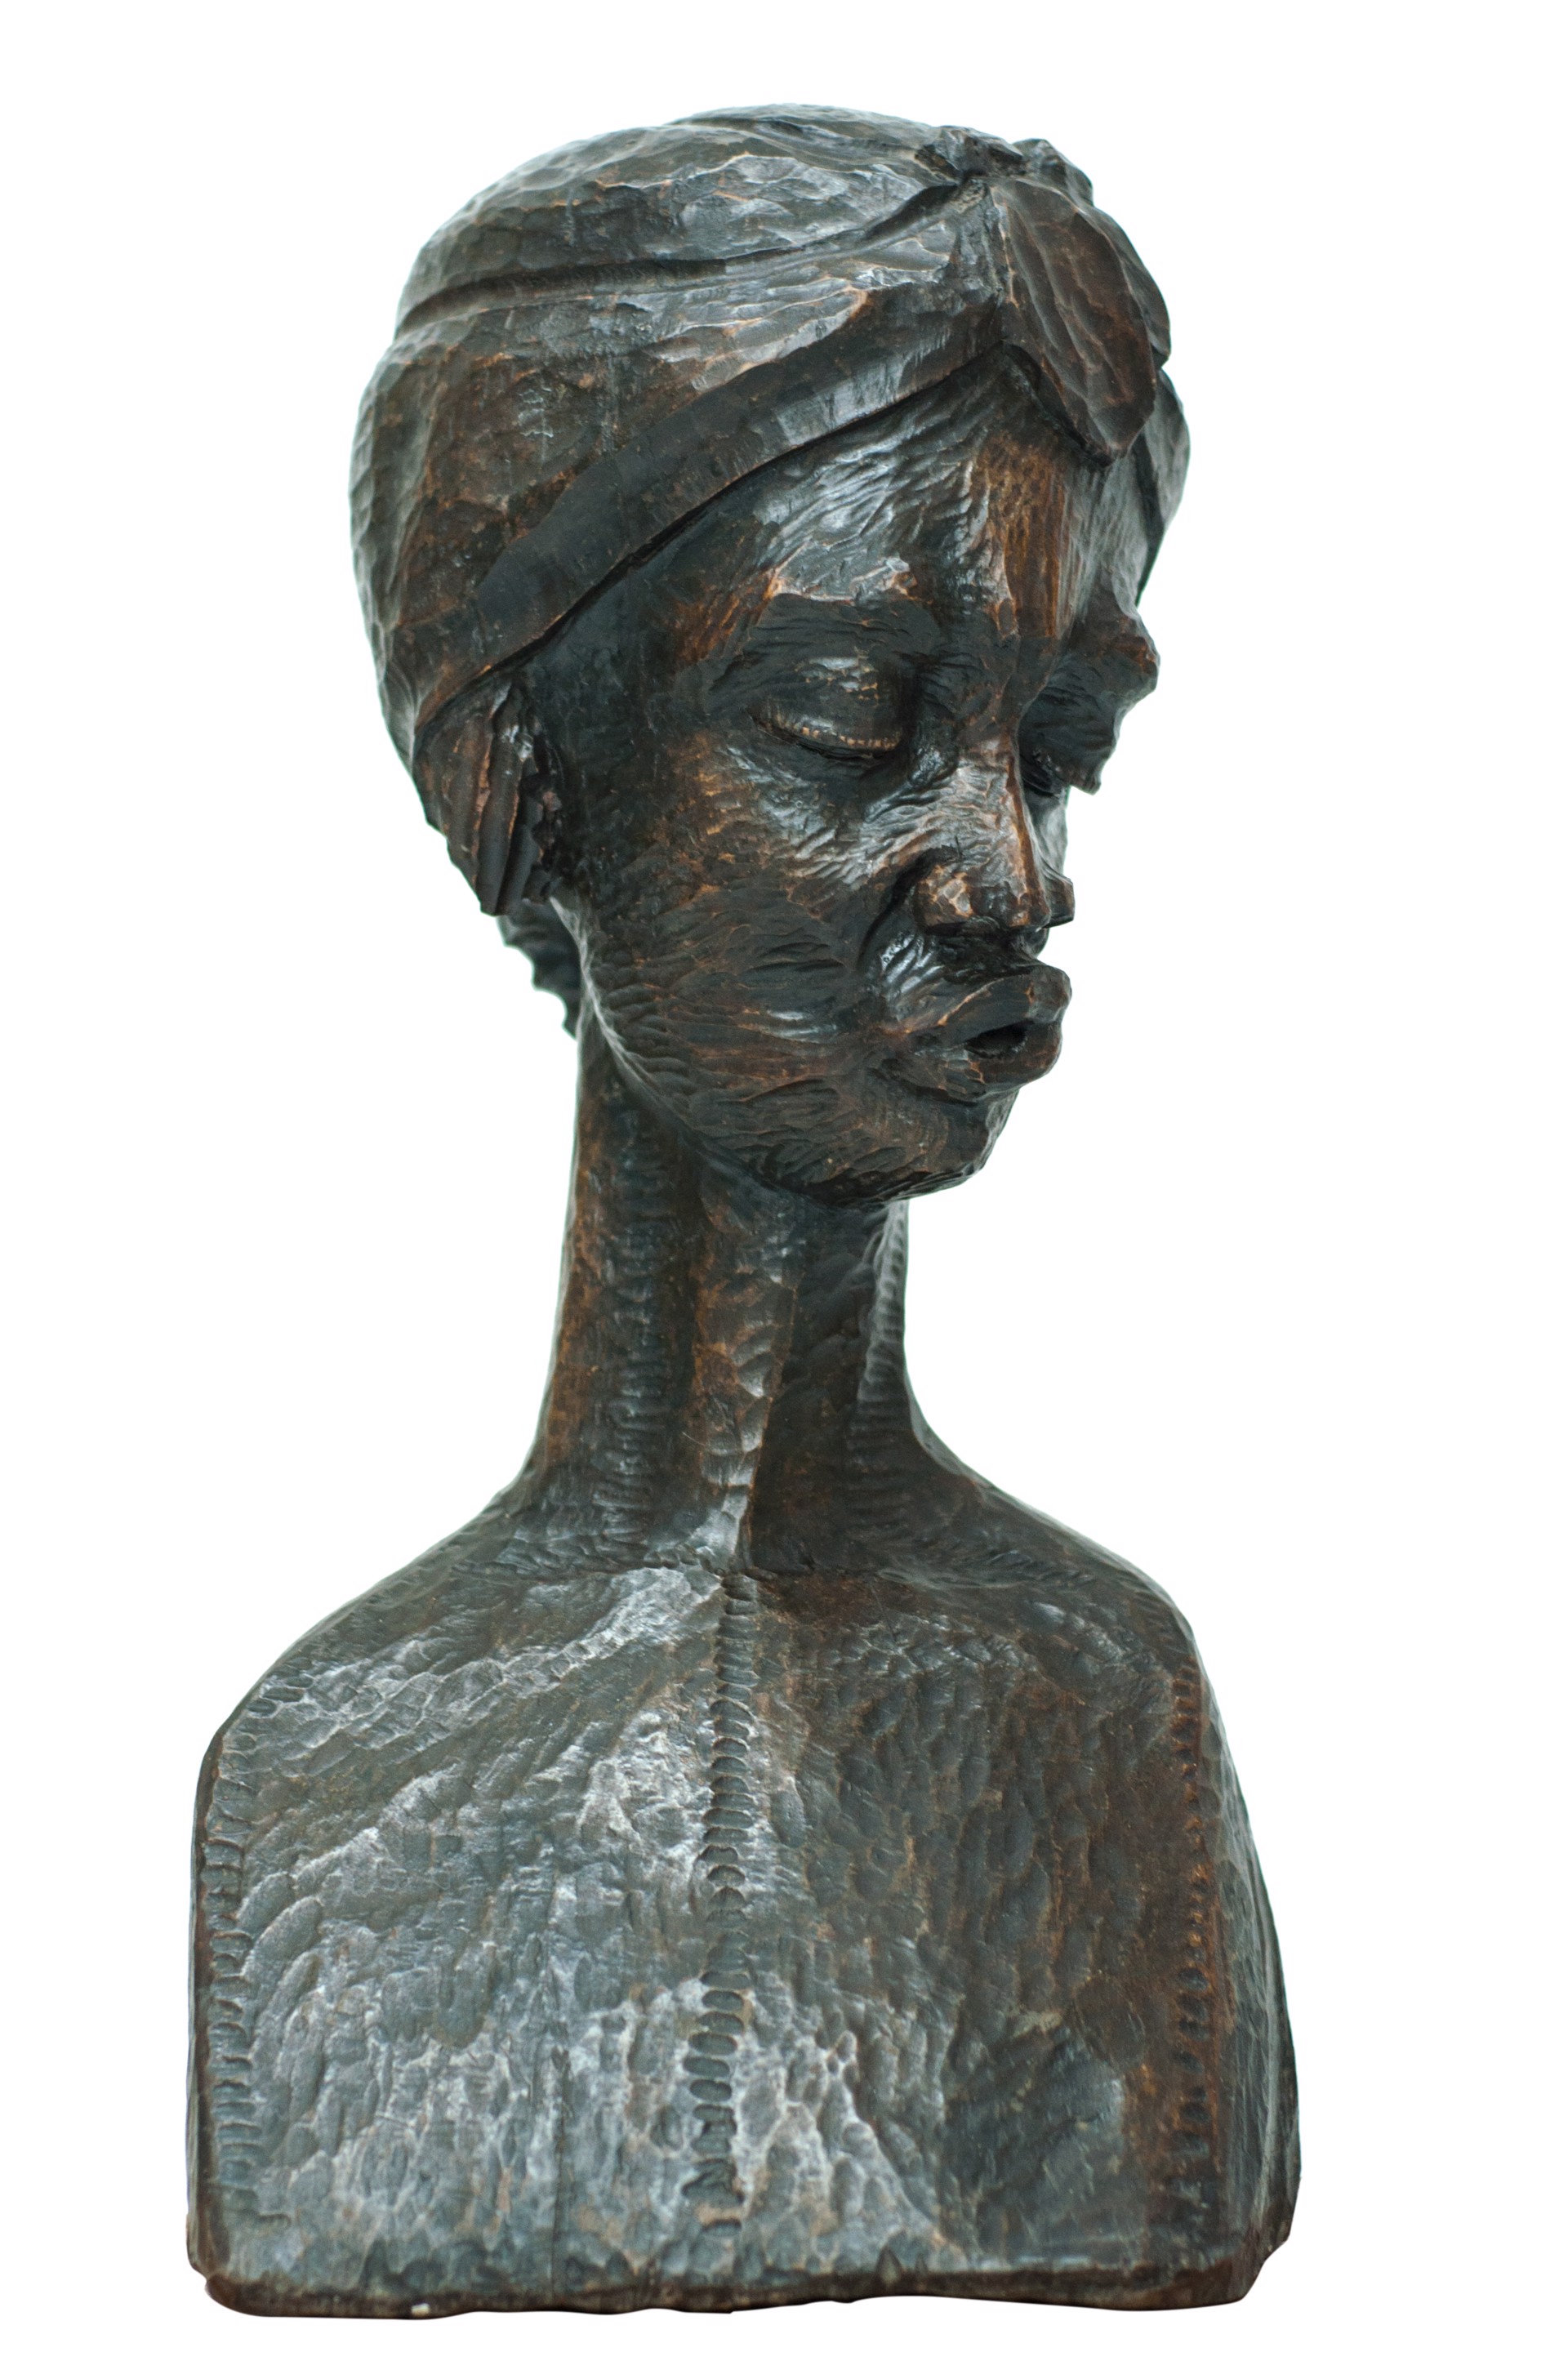 Woman Bust #1-3-11GSN by R. Volcy